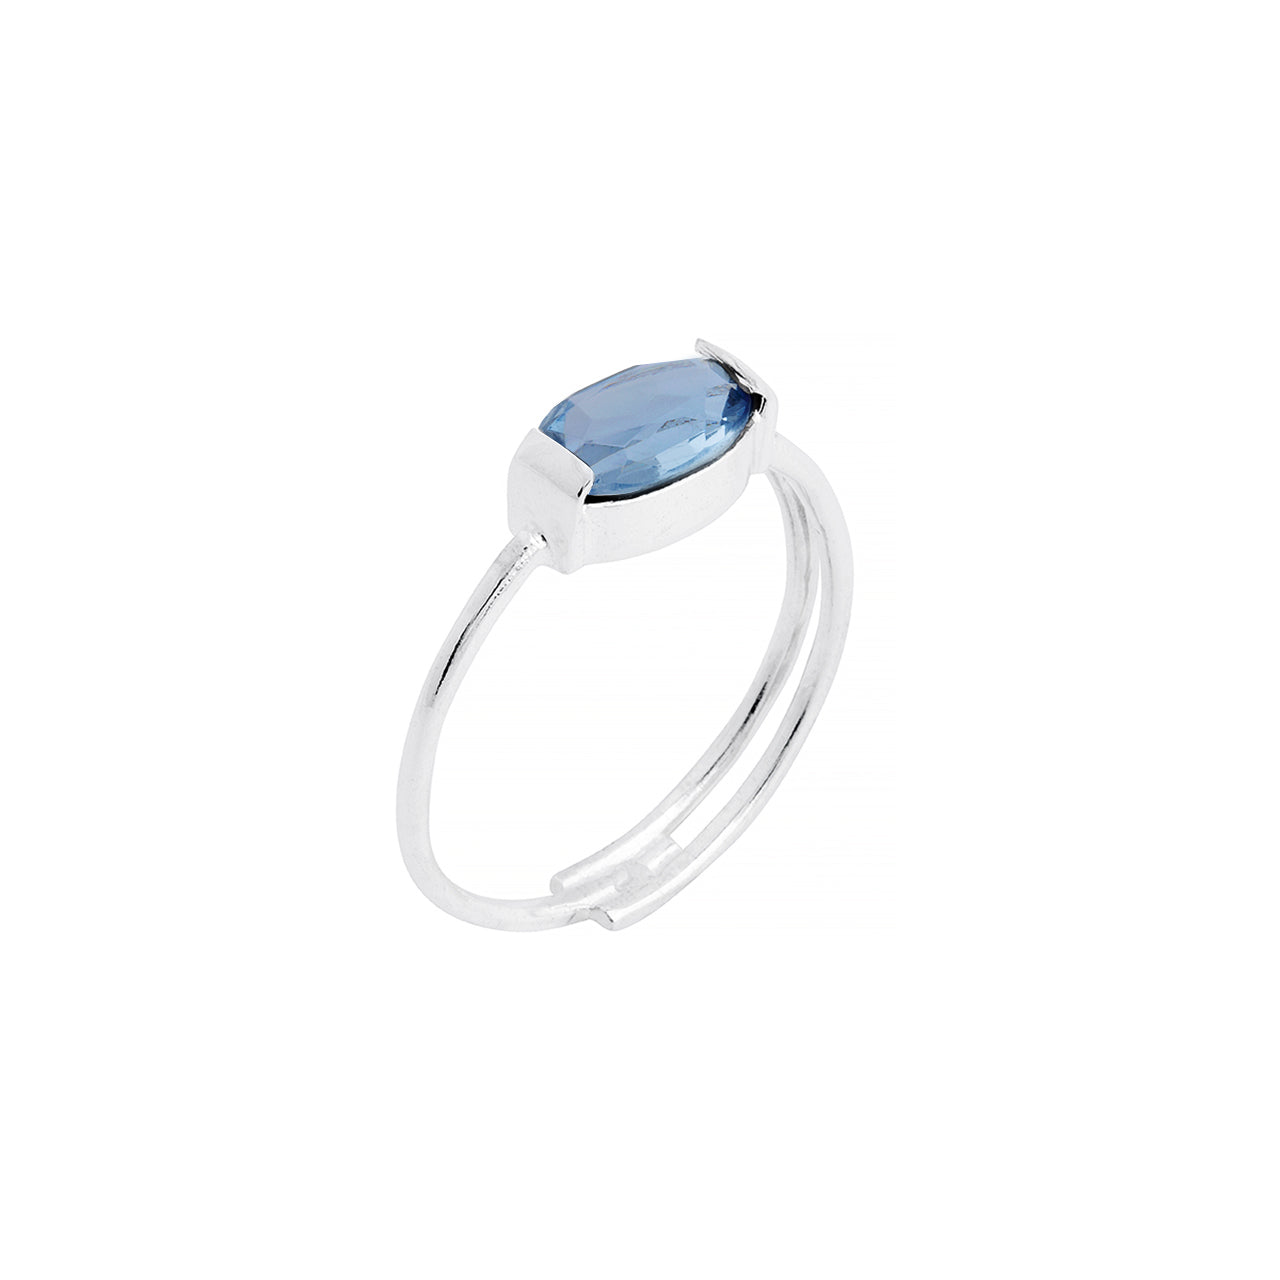 silver colon ring with vintage blue stone